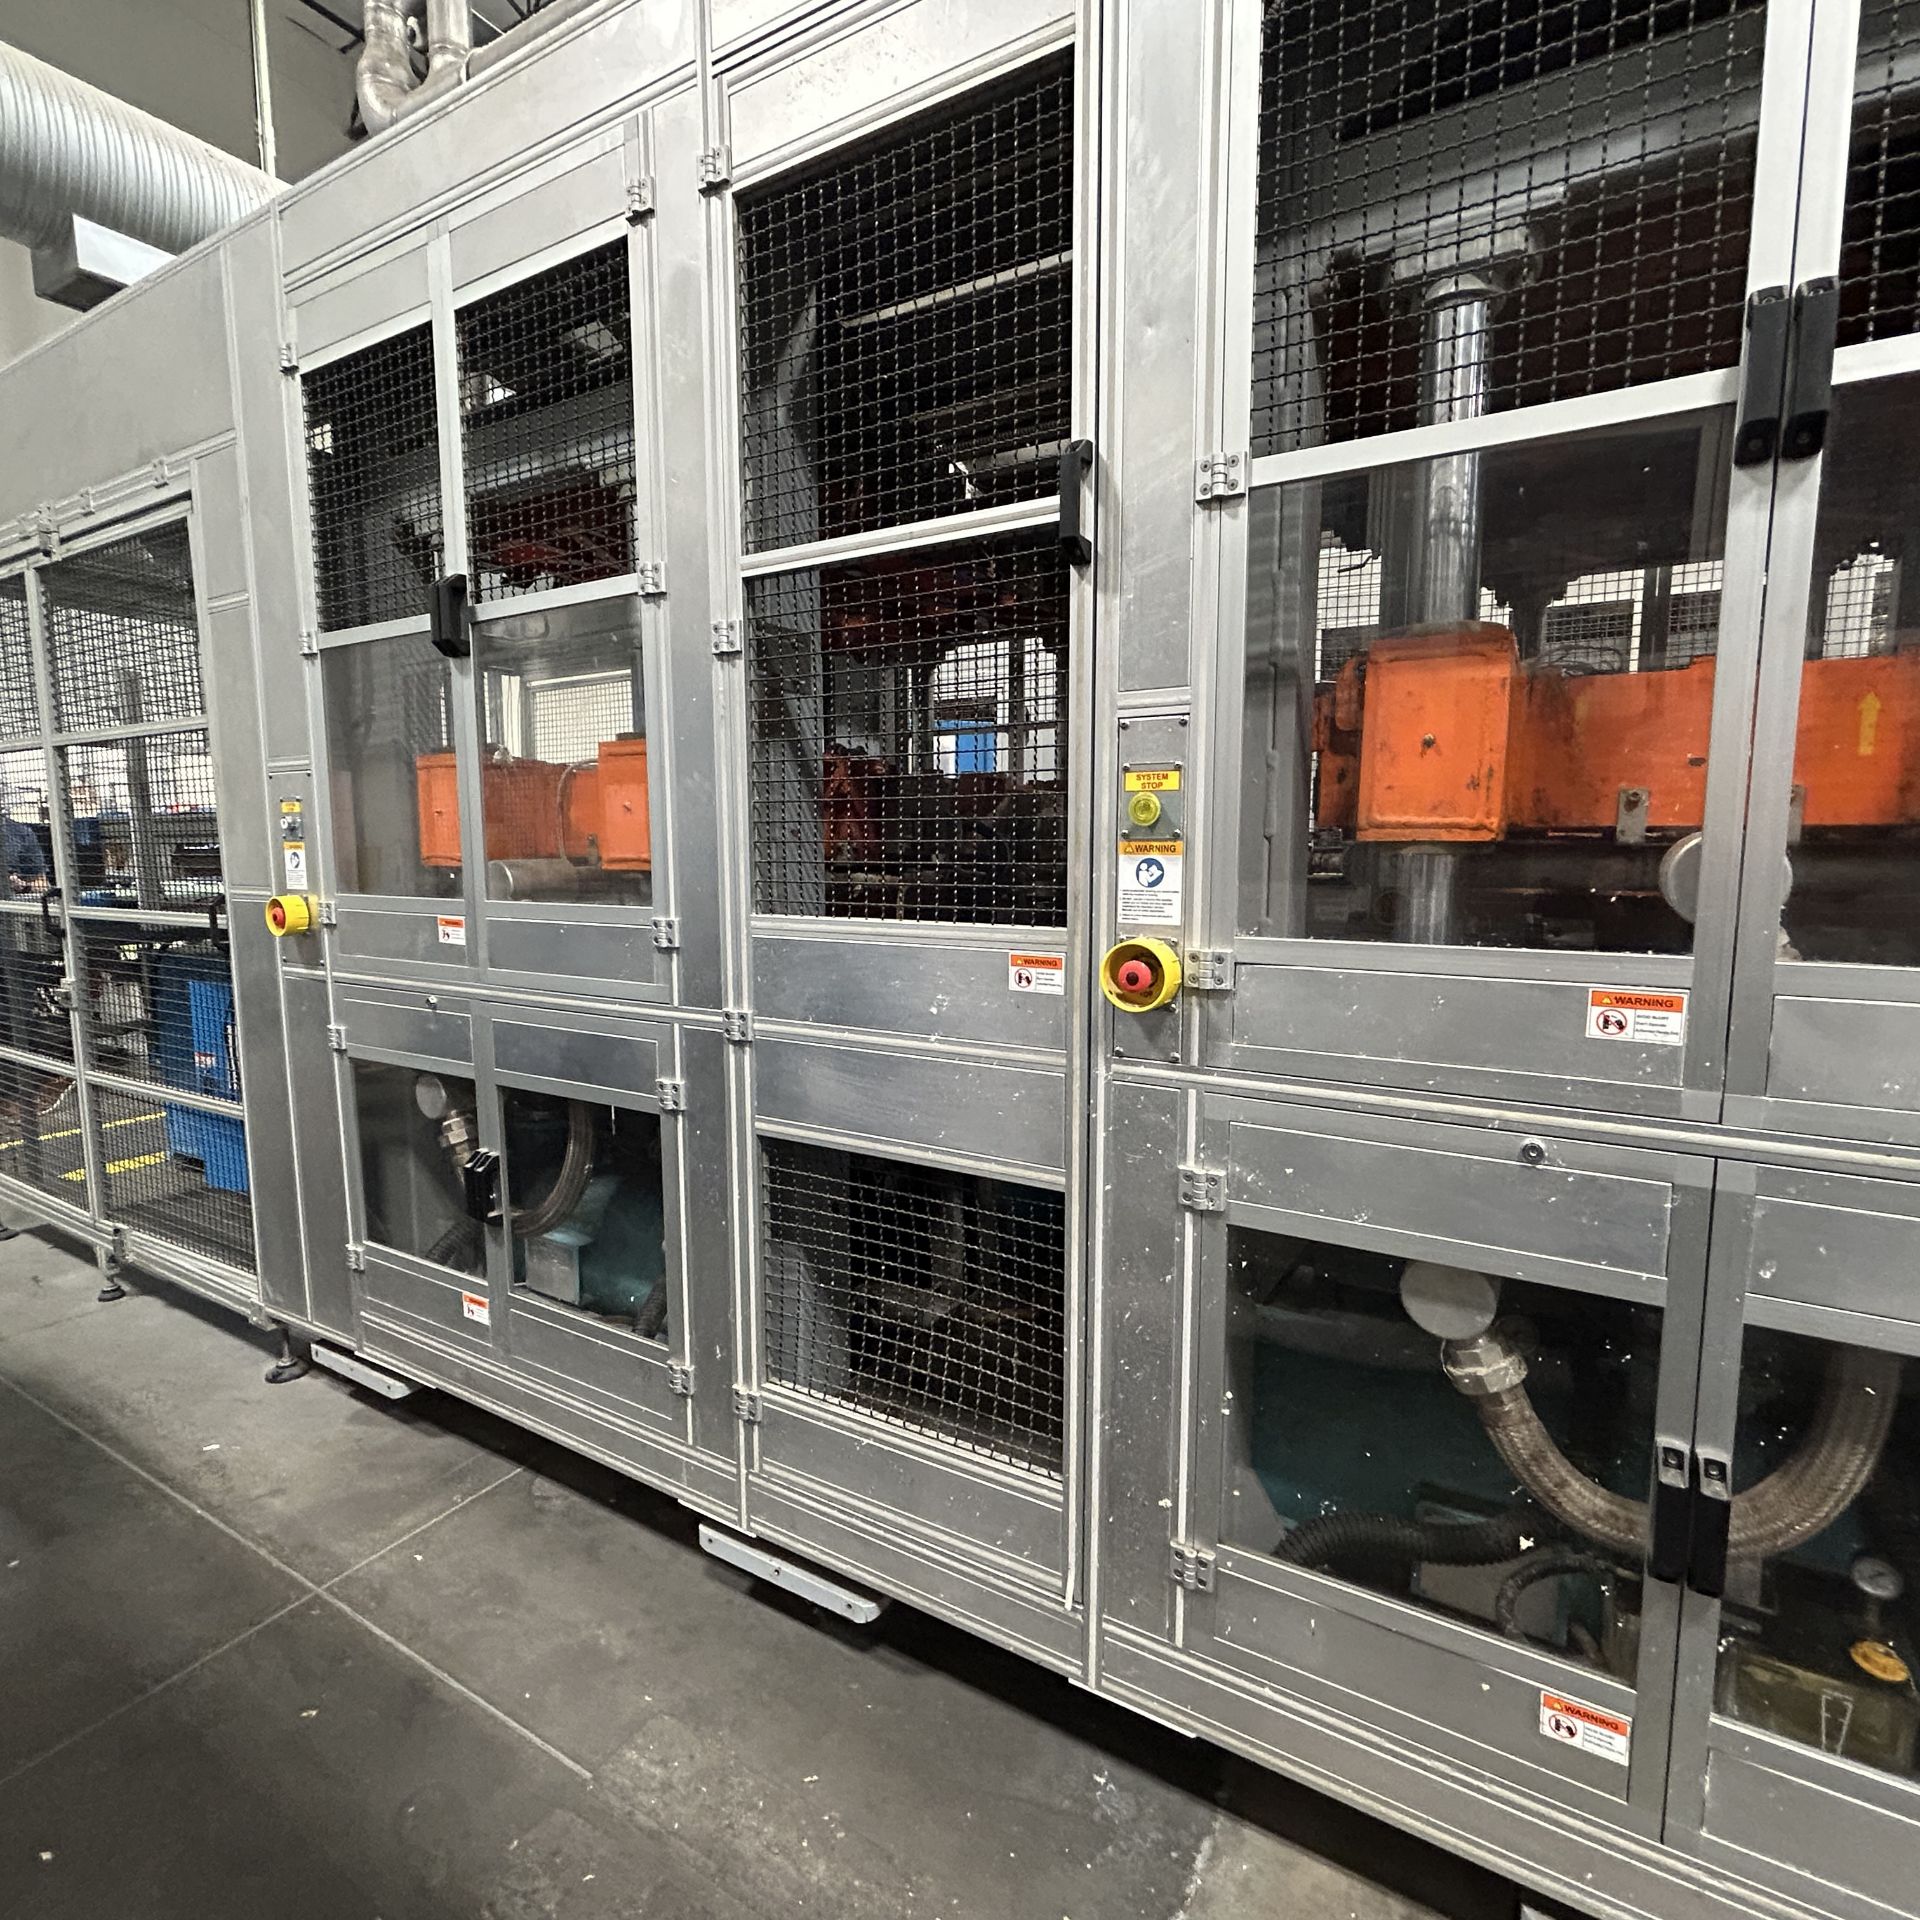 TPM-1500 3-Stage Pulp Thermoforming Machine Equipped With (1) 2018 TPM-AS-1500 2-Stage Auto Stacker - Image 13 of 35